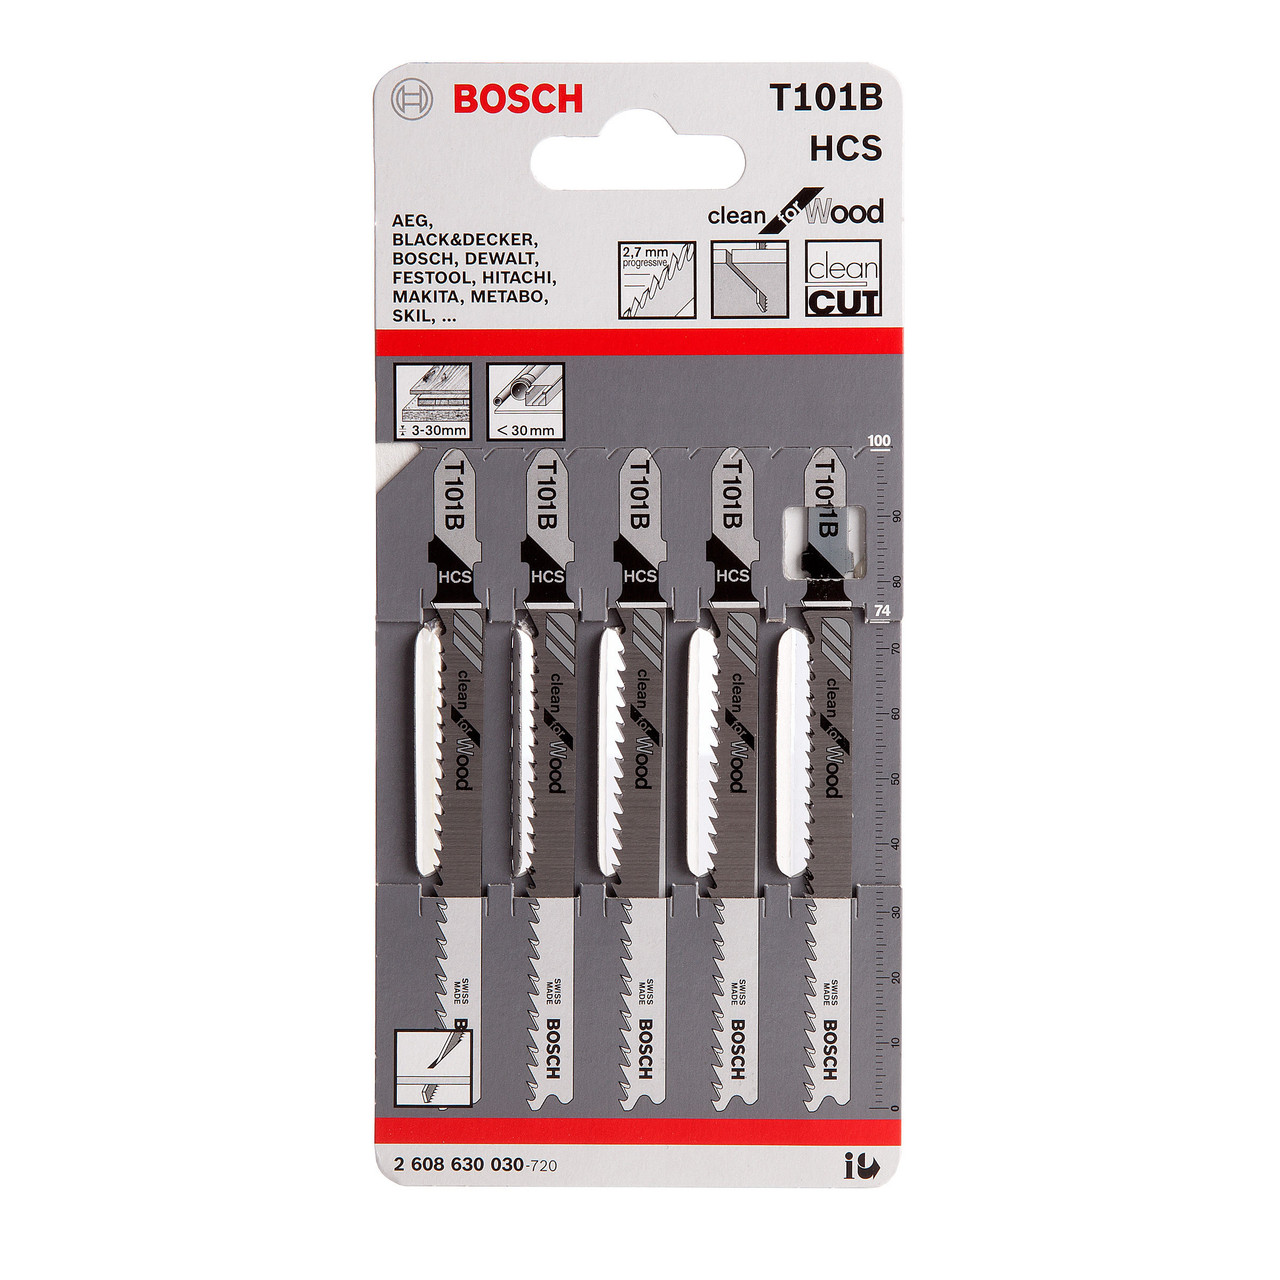 Photos - Power Tool Accessory Bosch T101B Jigsaw Blades HCS Clean for Wood  2608630030 (5 Pack)